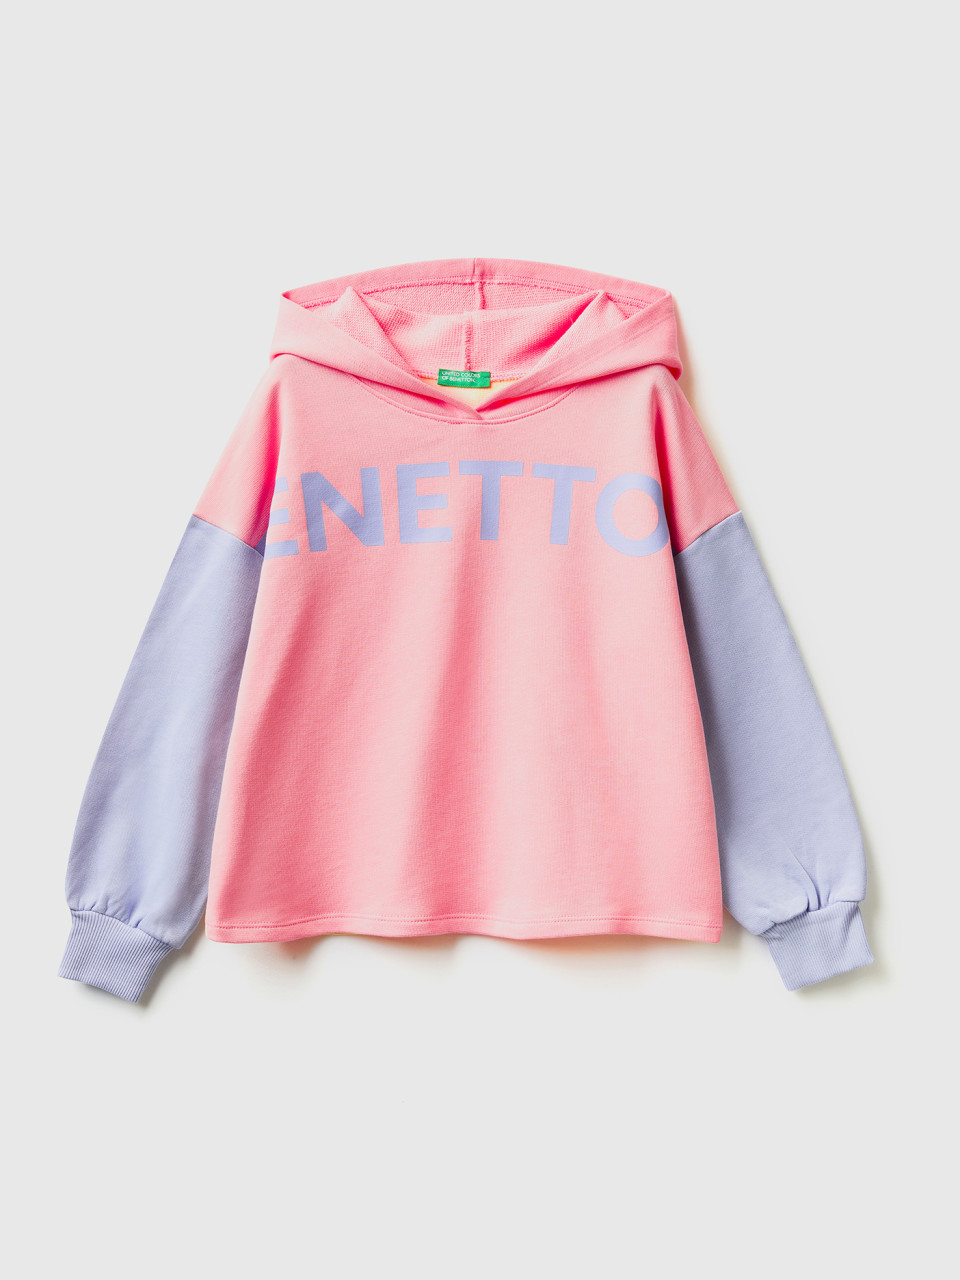 Benetton, Oversized Fit Hoodie, Multi-color, Kids